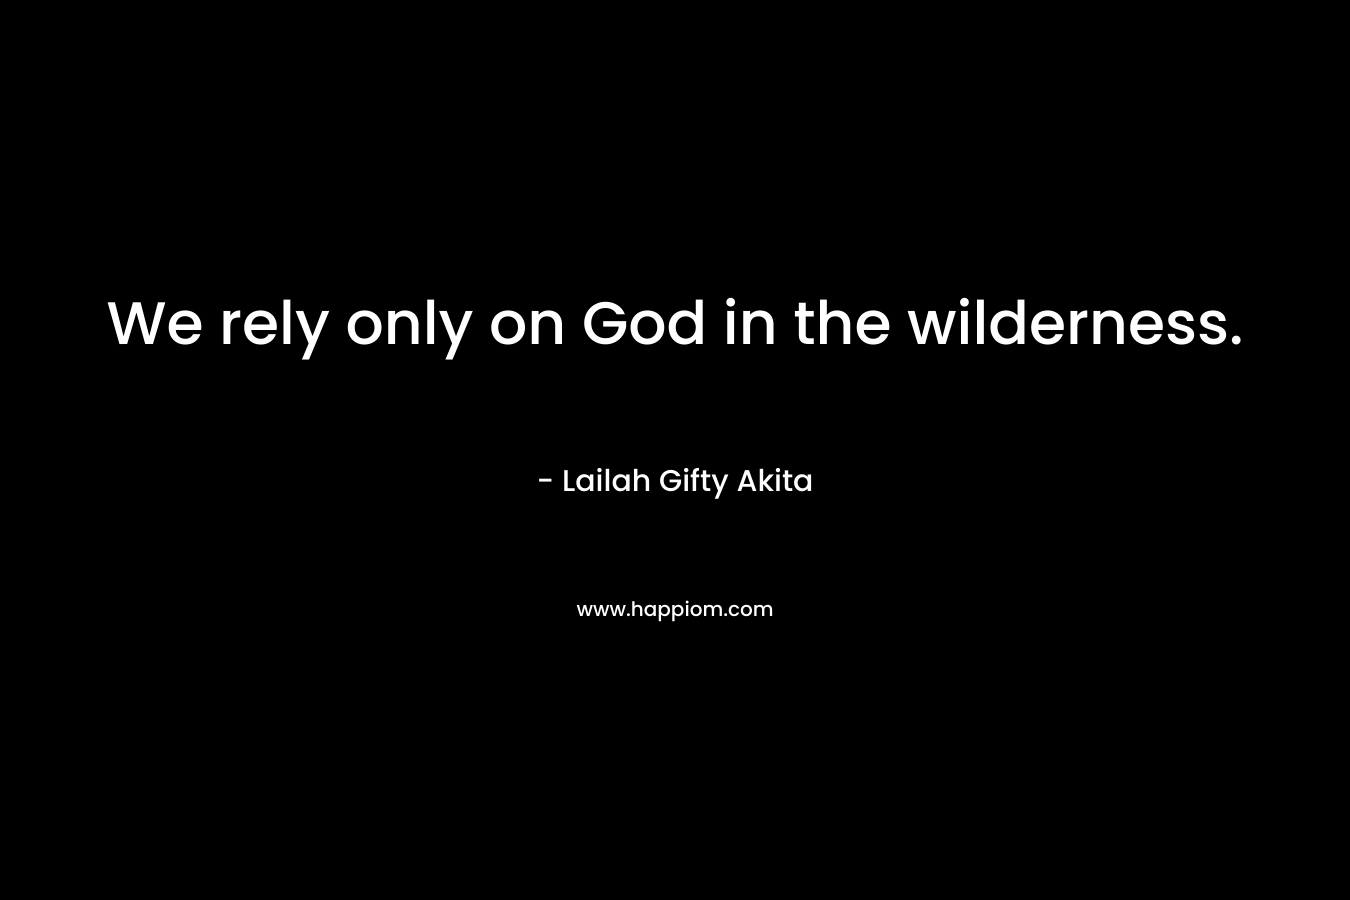 We rely only on God in the wilderness.